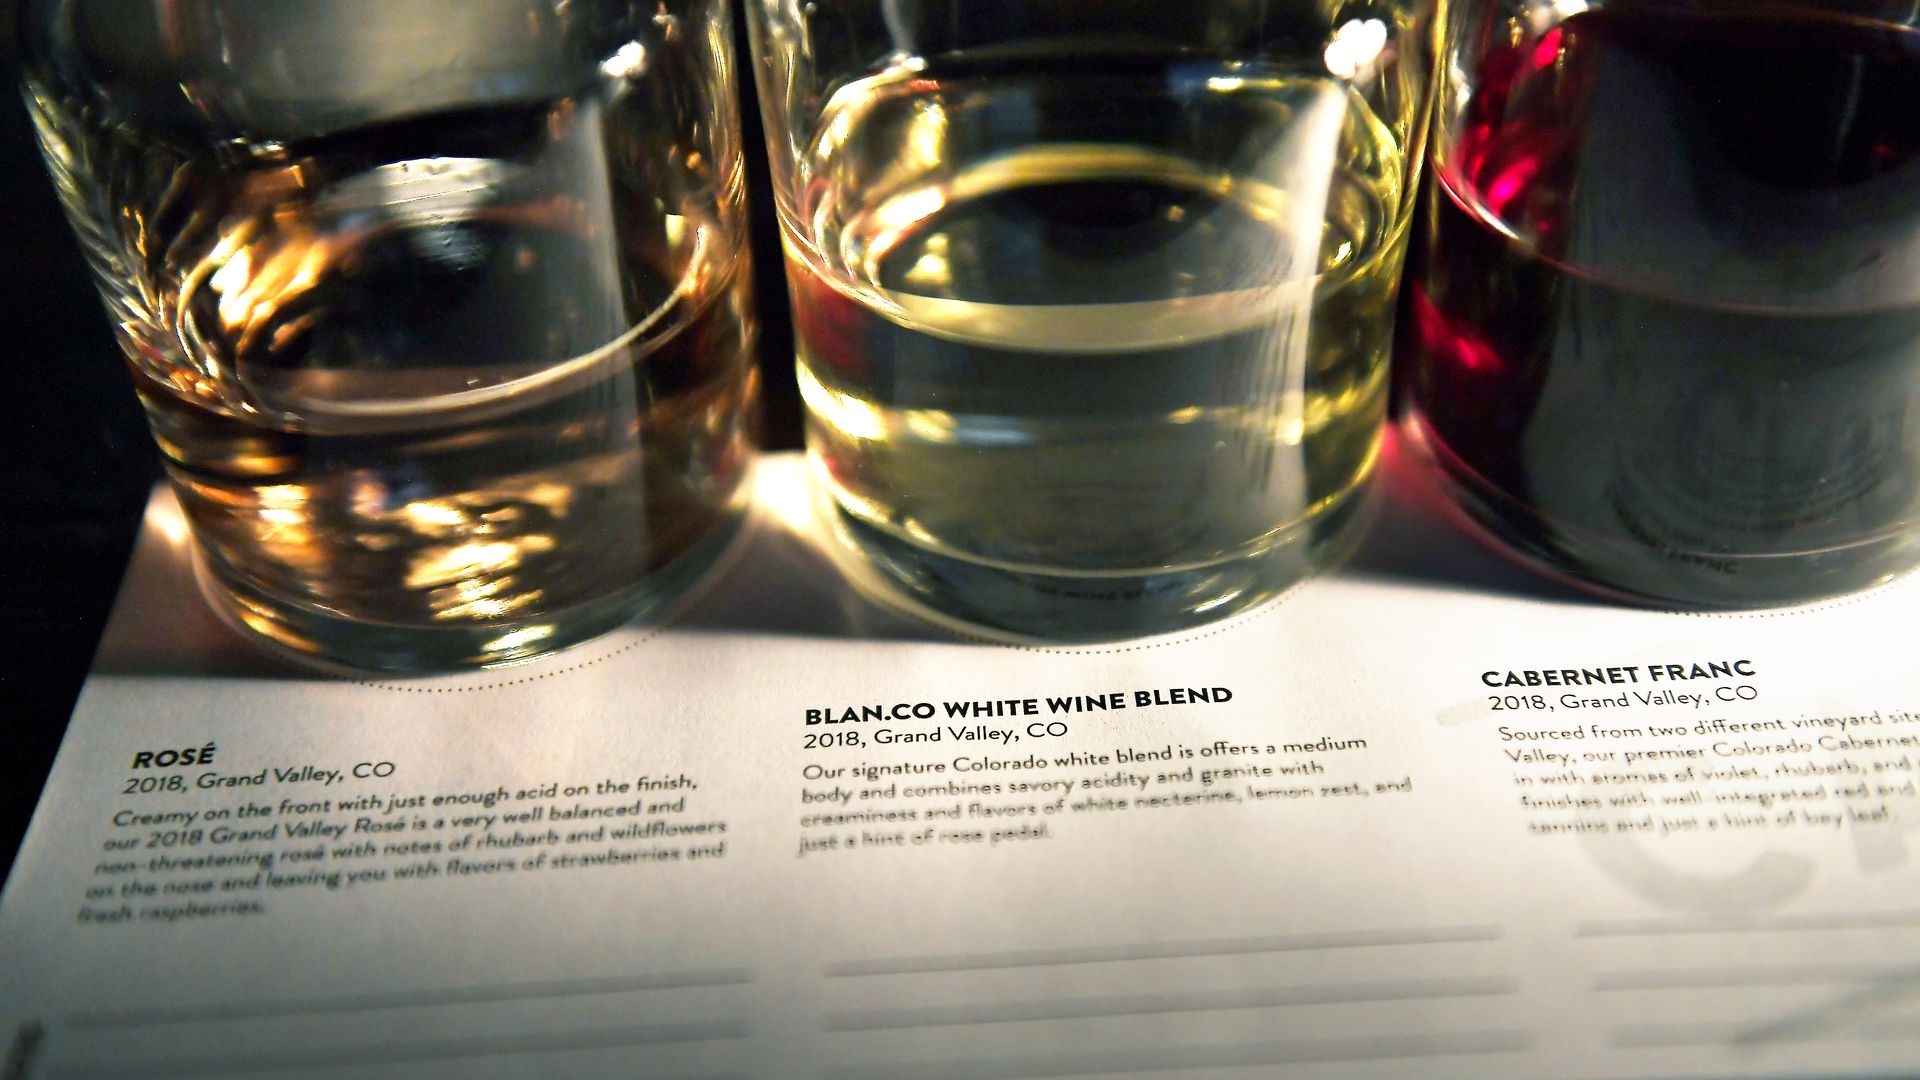 A flight of wines at Carboy Winery in Denver. Photo: Joe Amon/Denver Post via Getty Images